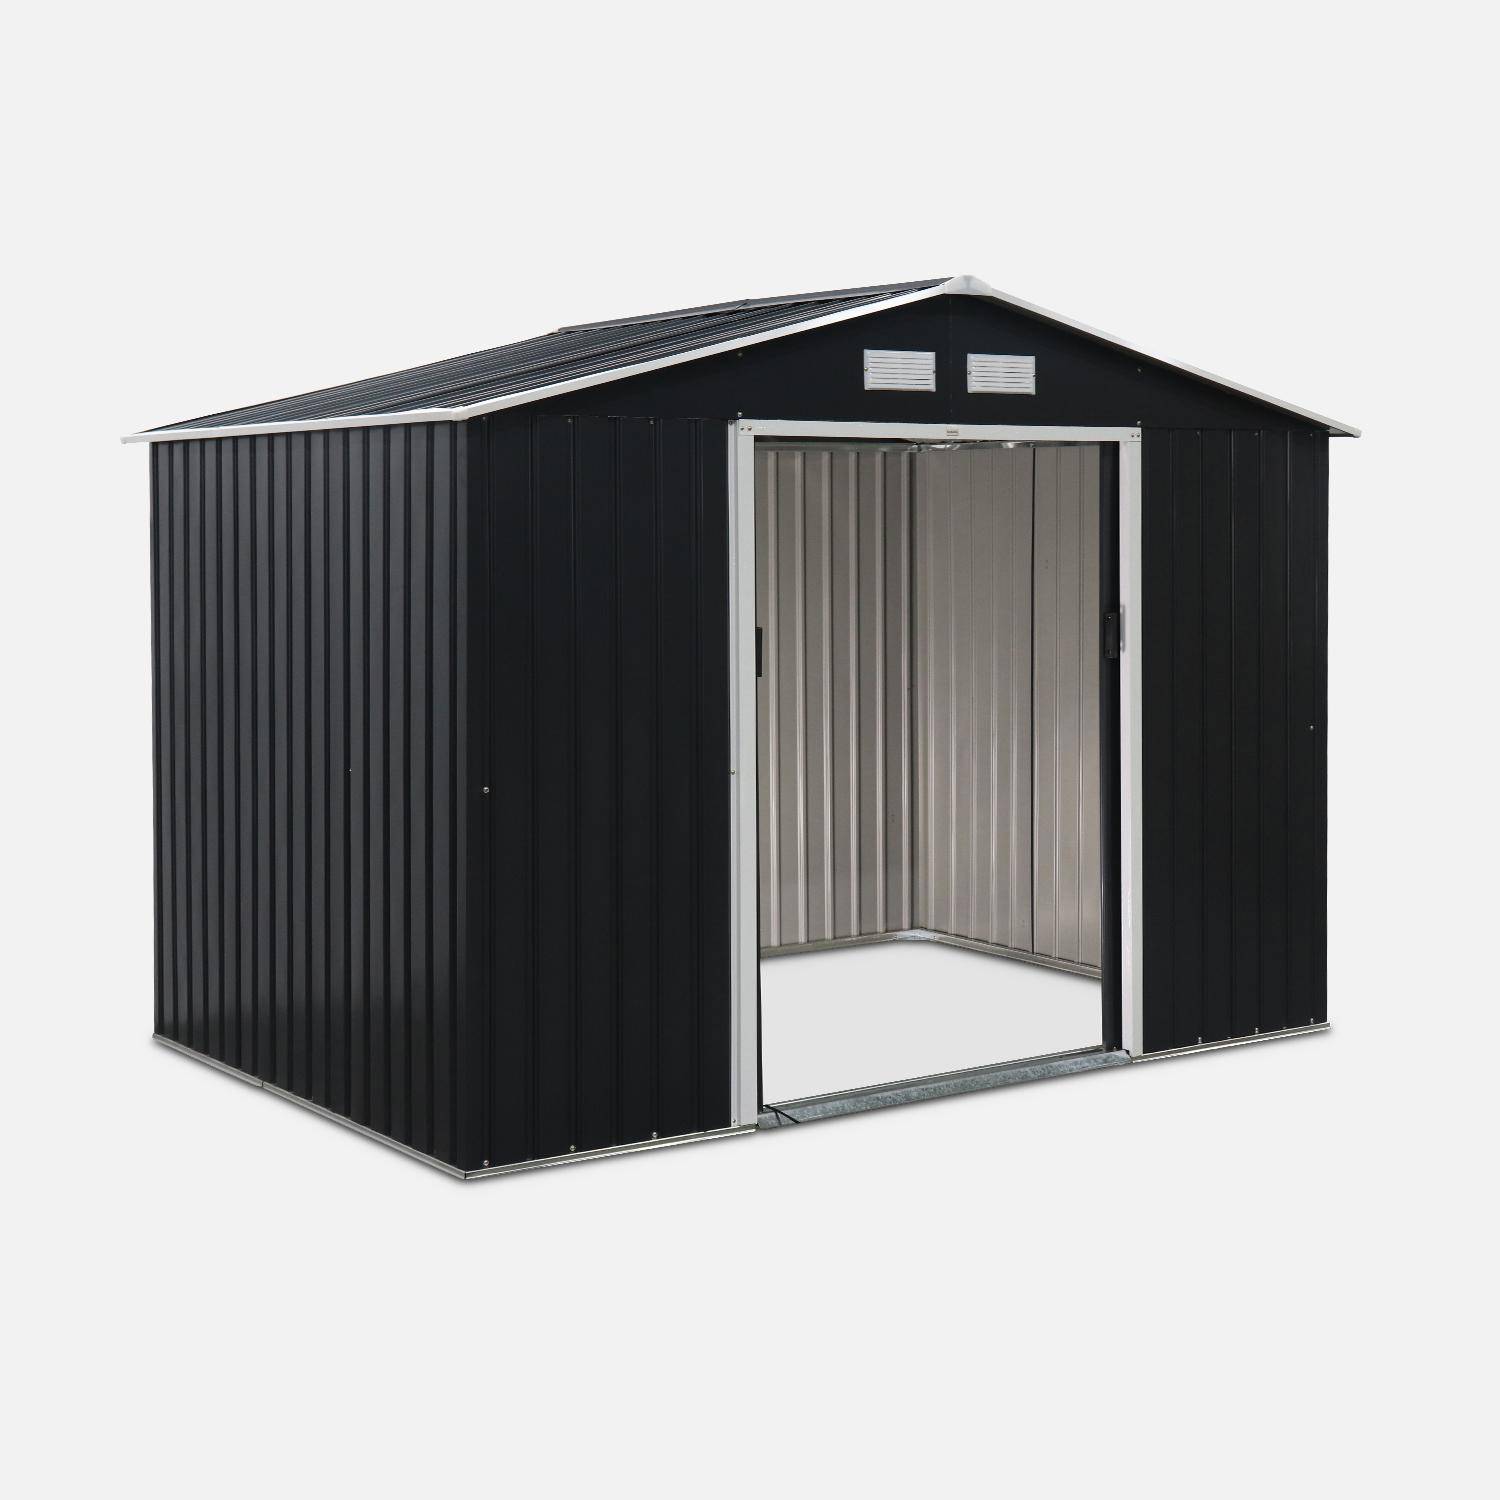 (9 X 6FT) 5.39m² Metal garden shed - Tool shed with single latch door, ground fixing kit supplied - Ferrain - Grey and White Photo4